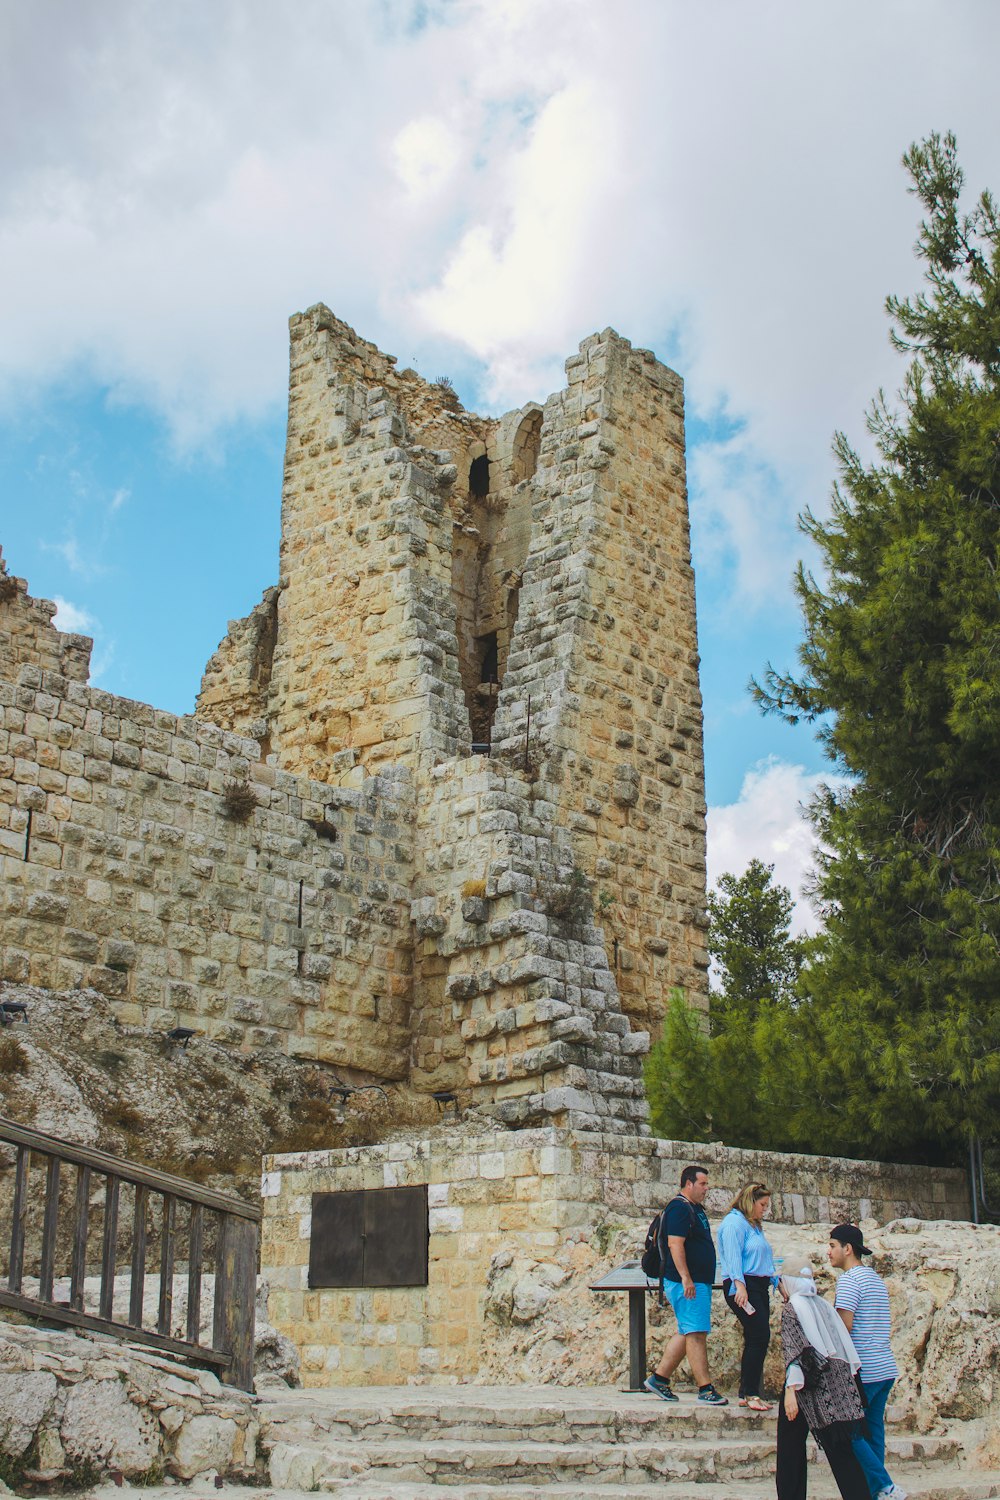 a group of people standing in front of a stone castle